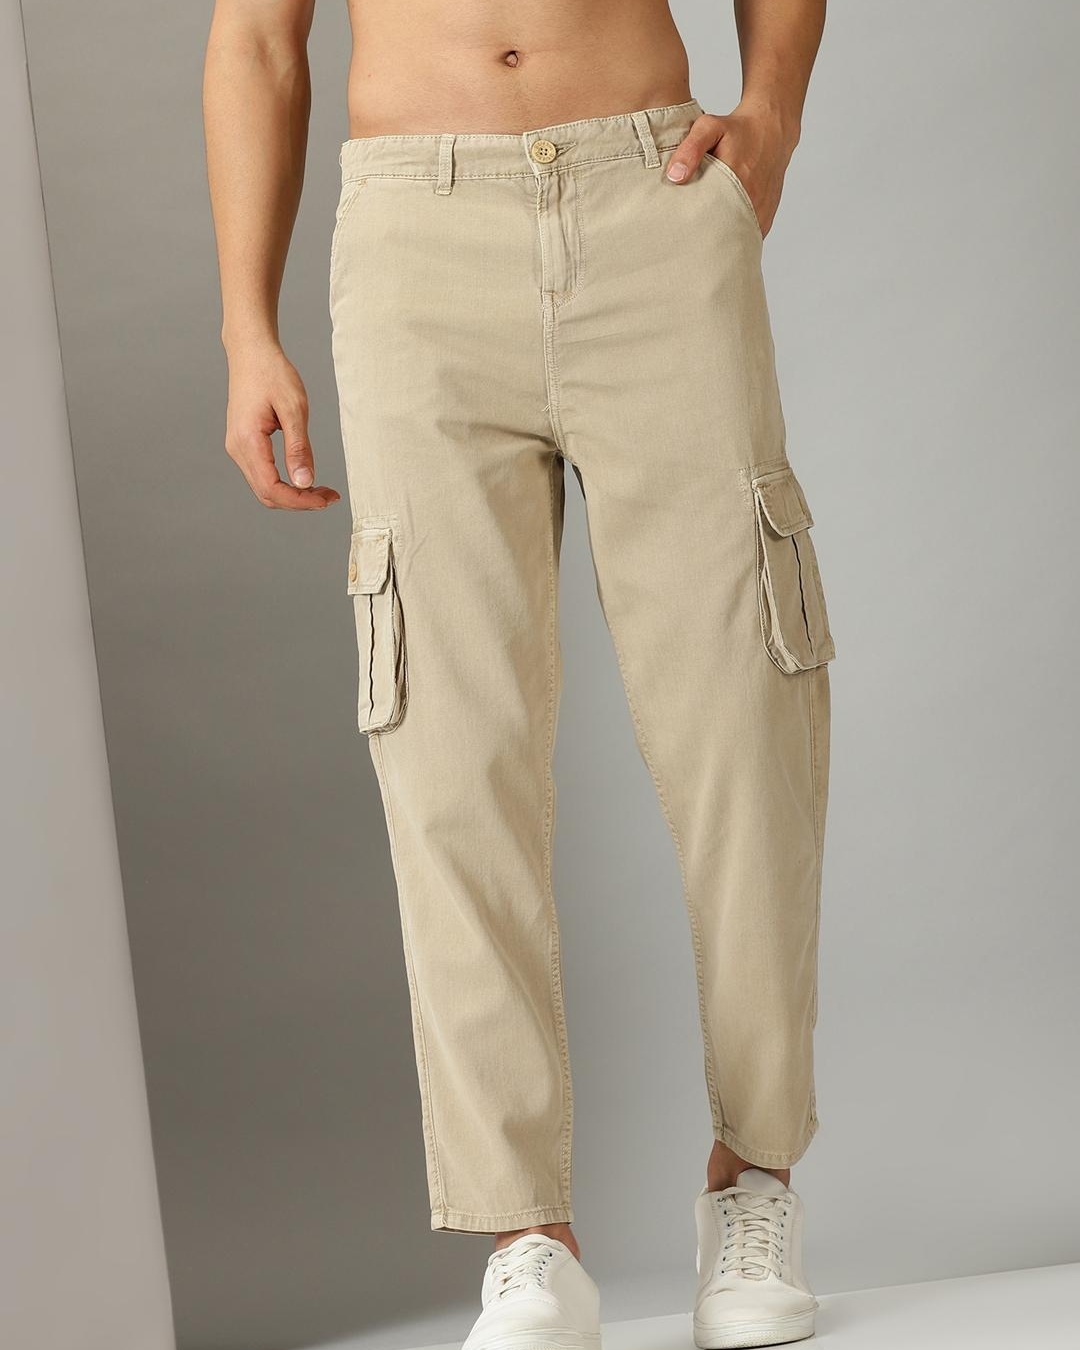 Buy Gap Cuffed Teen Cargo Trousers from the Gap online shop